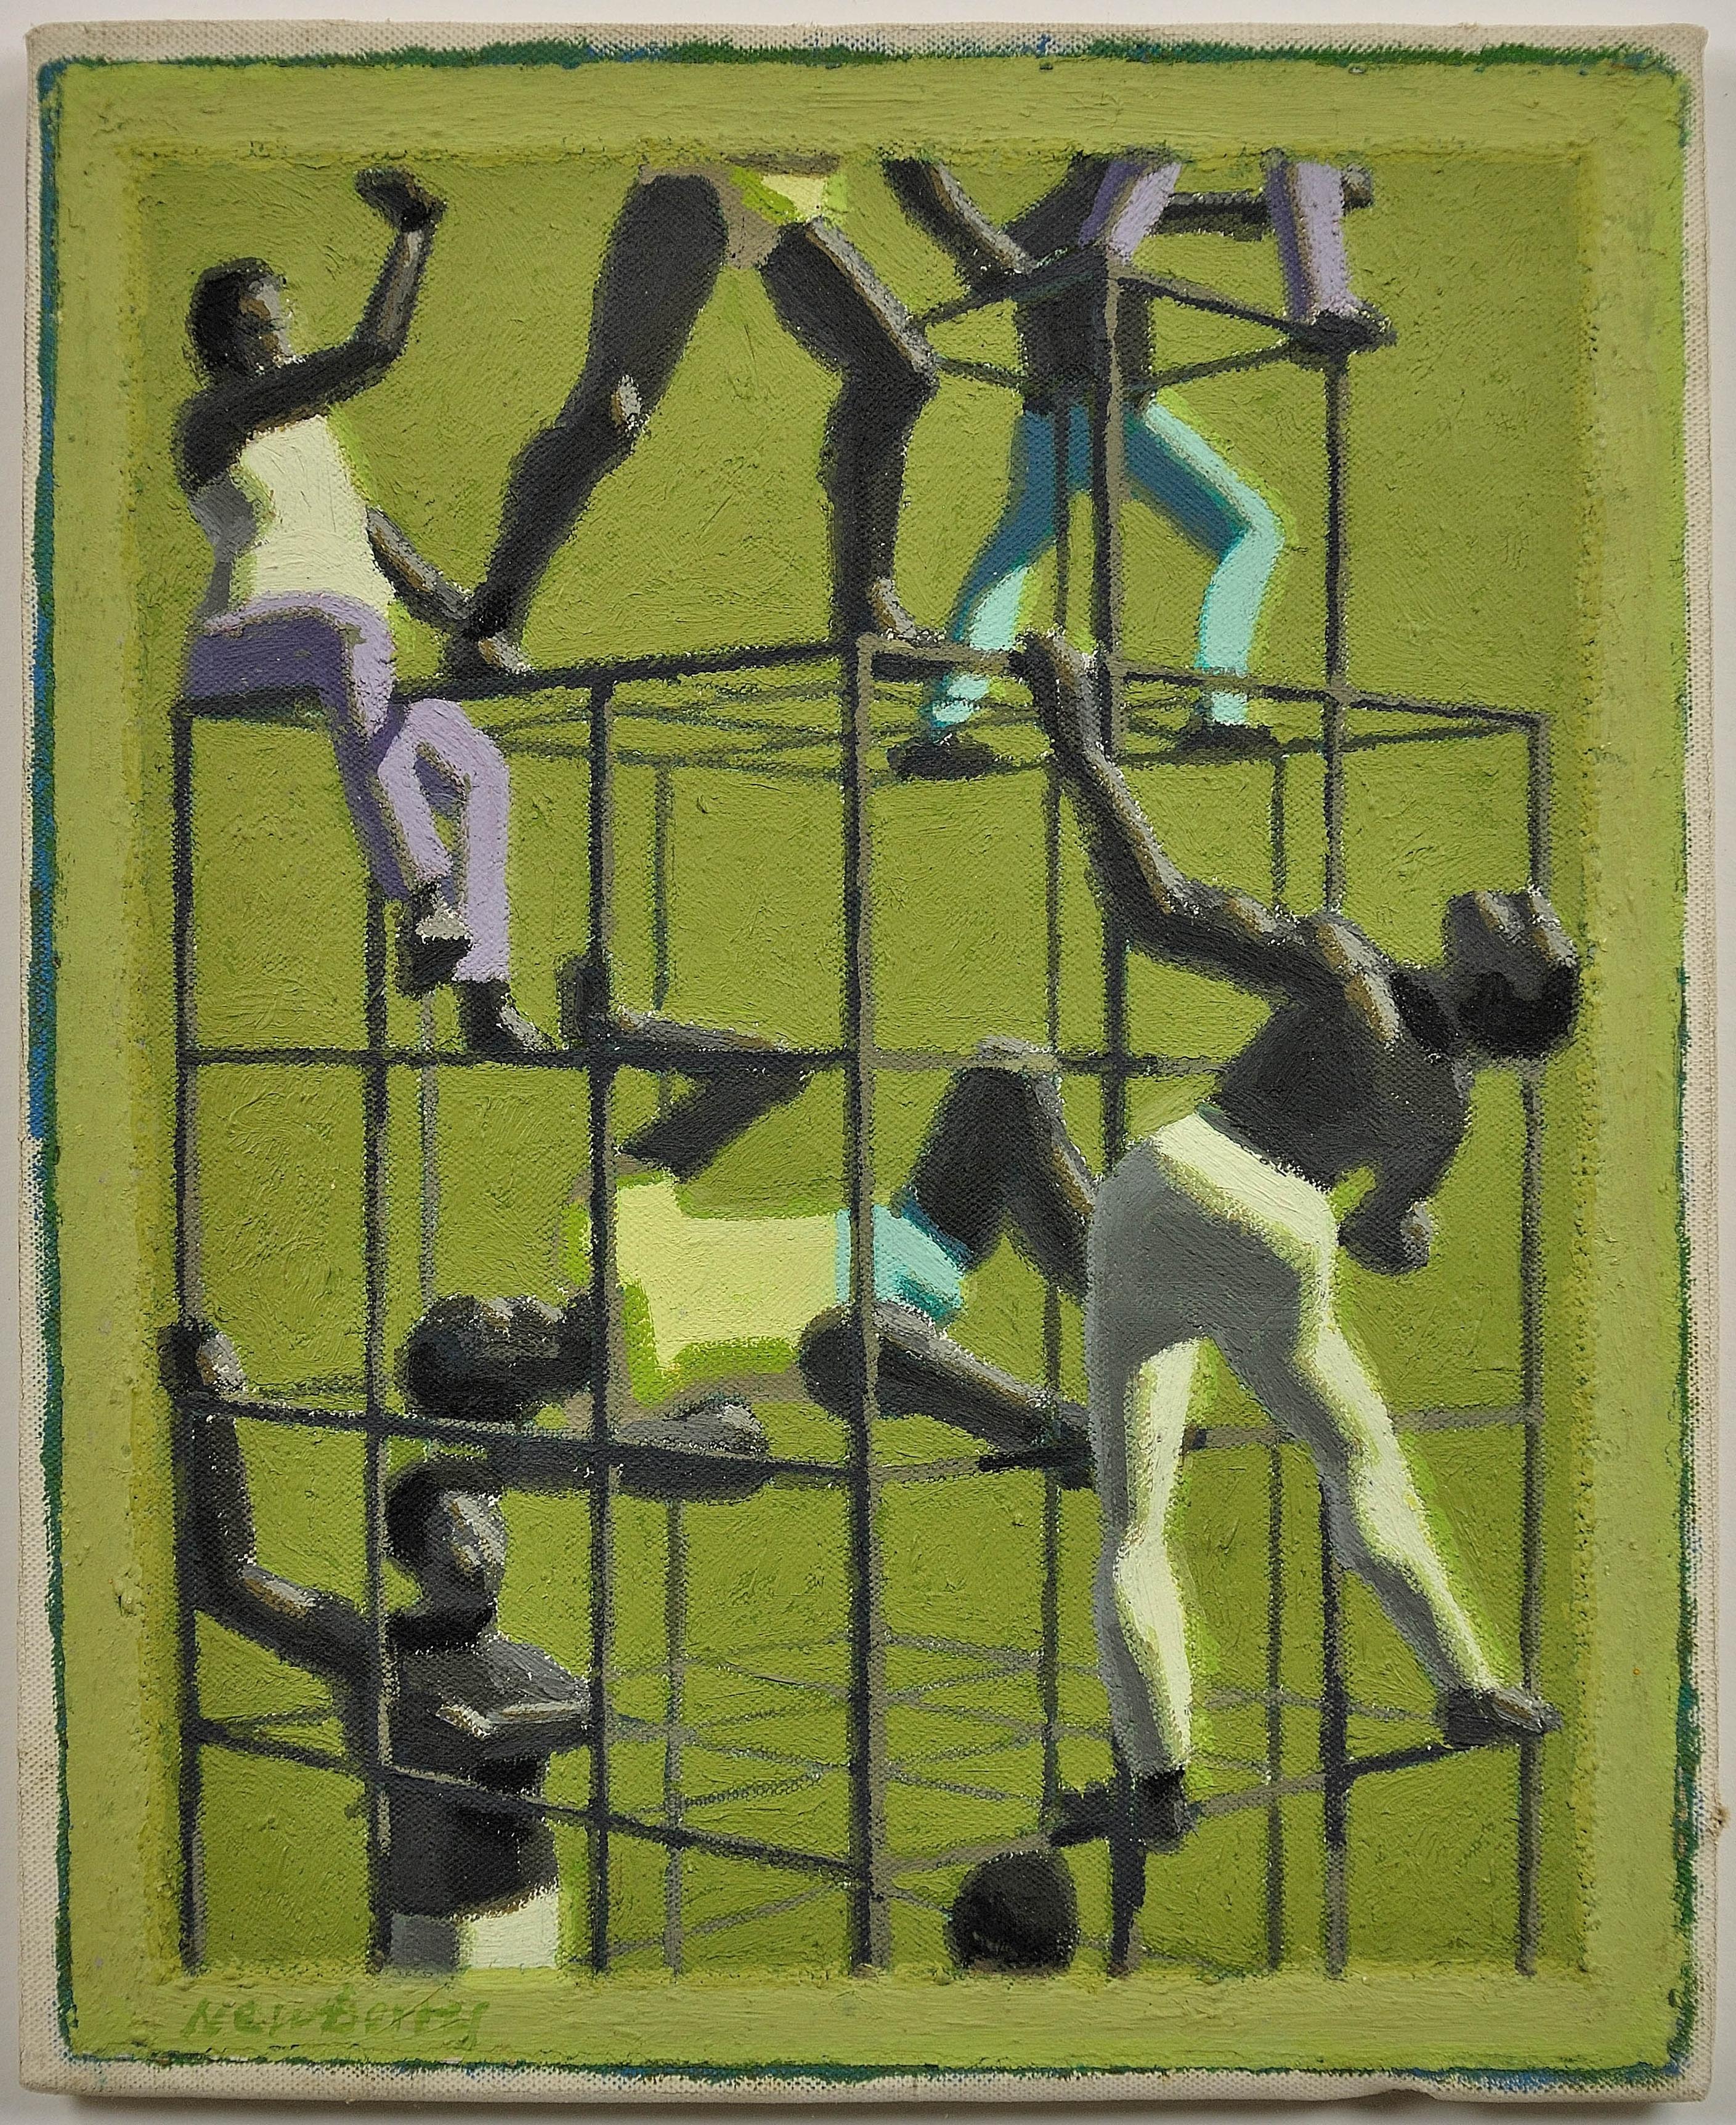 The Climbers, 1970. Geometric Abstract Parallel Projection.Ruskin School Oxford. - Painting by John Coverdale Newberry